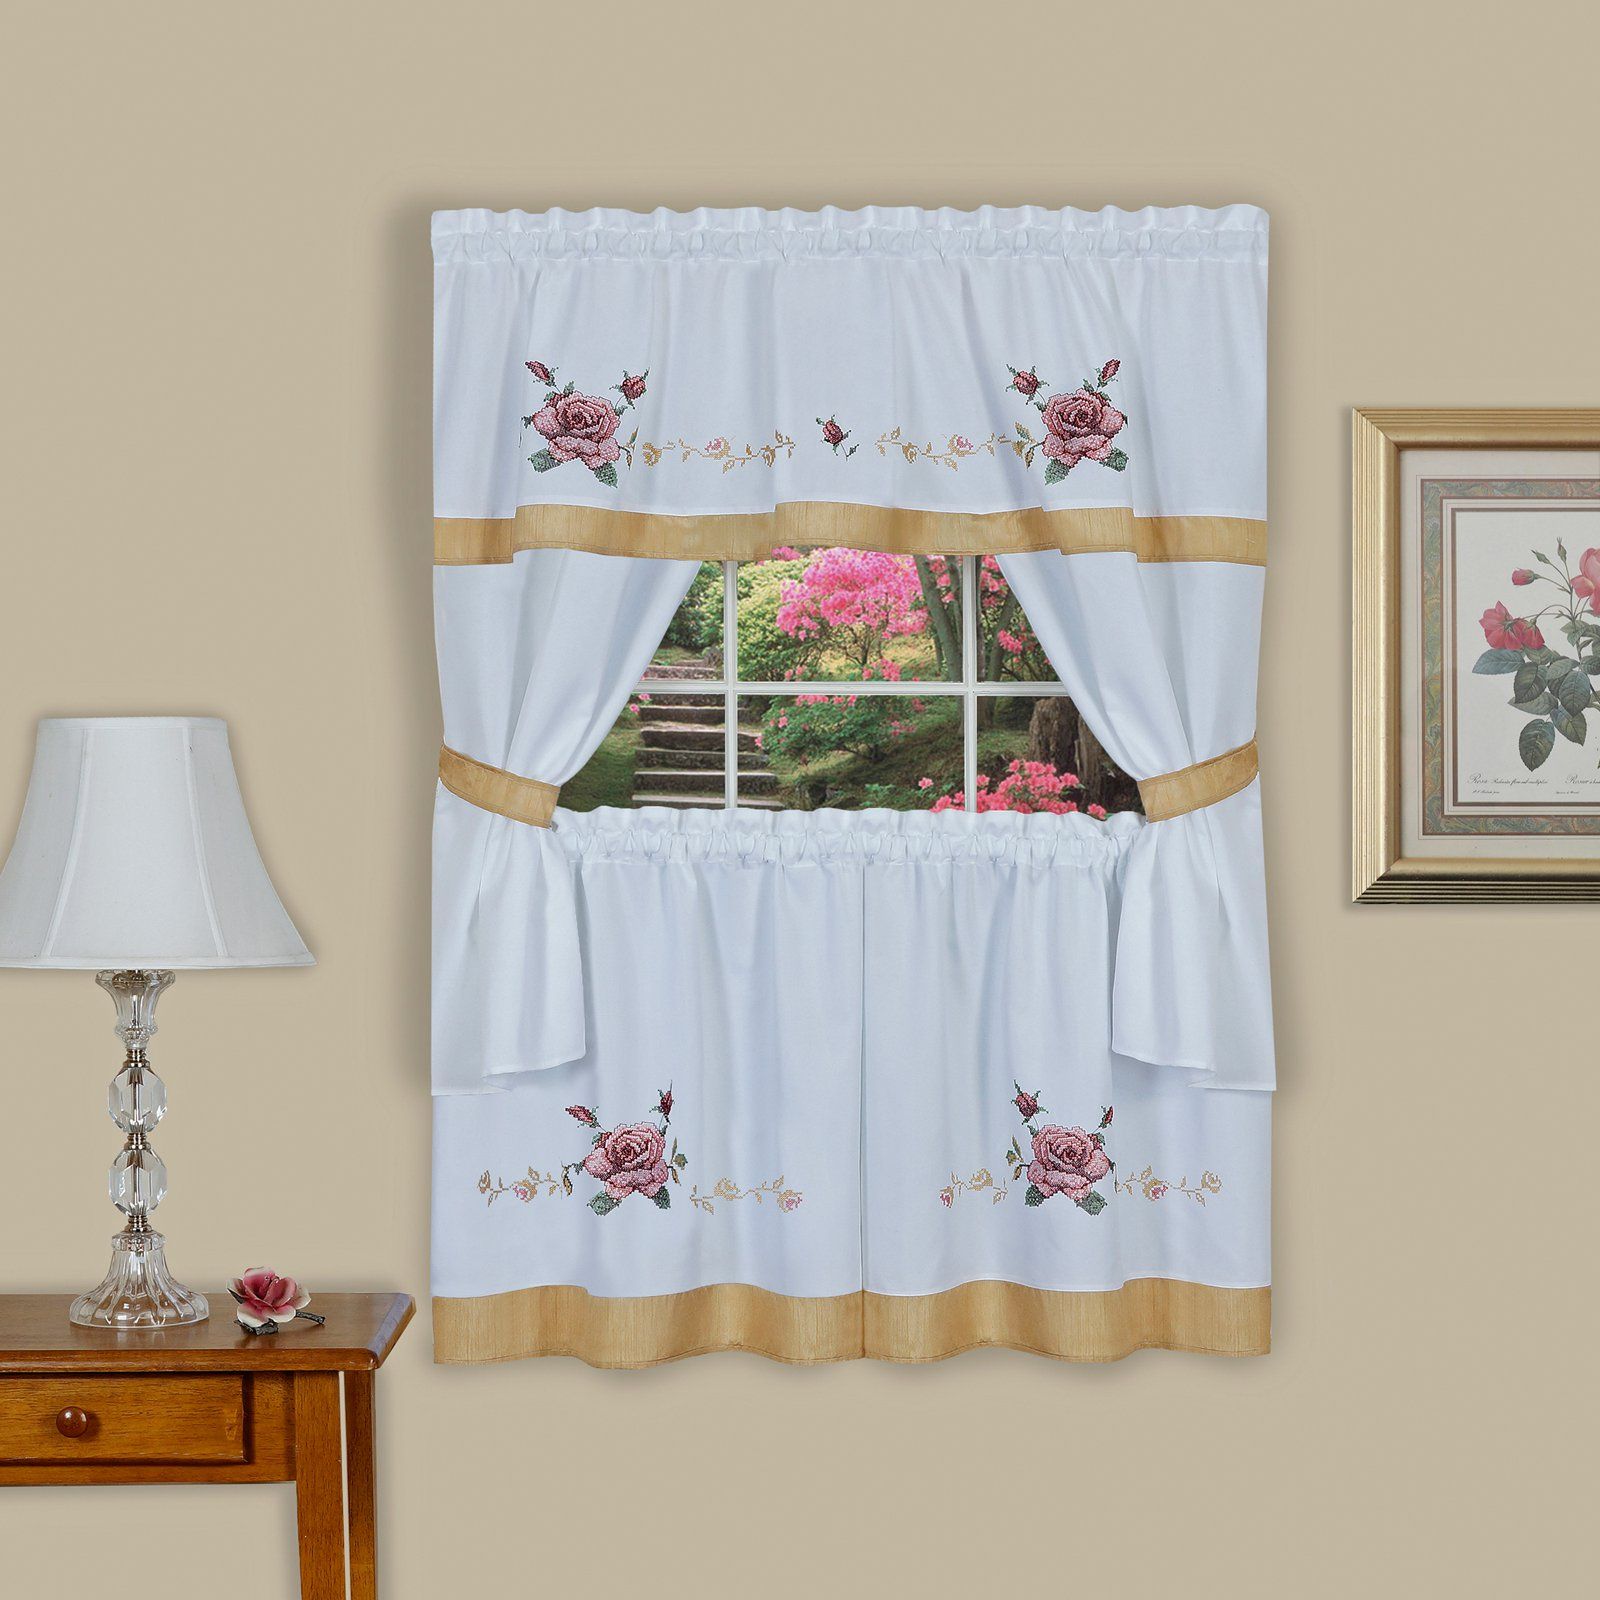 Achim Rose Embellished Cottage Window Curtain Set In 2019 Throughout 5 Piece Burgundy Embroidered Cabernet Kitchen Curtain Sets (View 5 of 20)